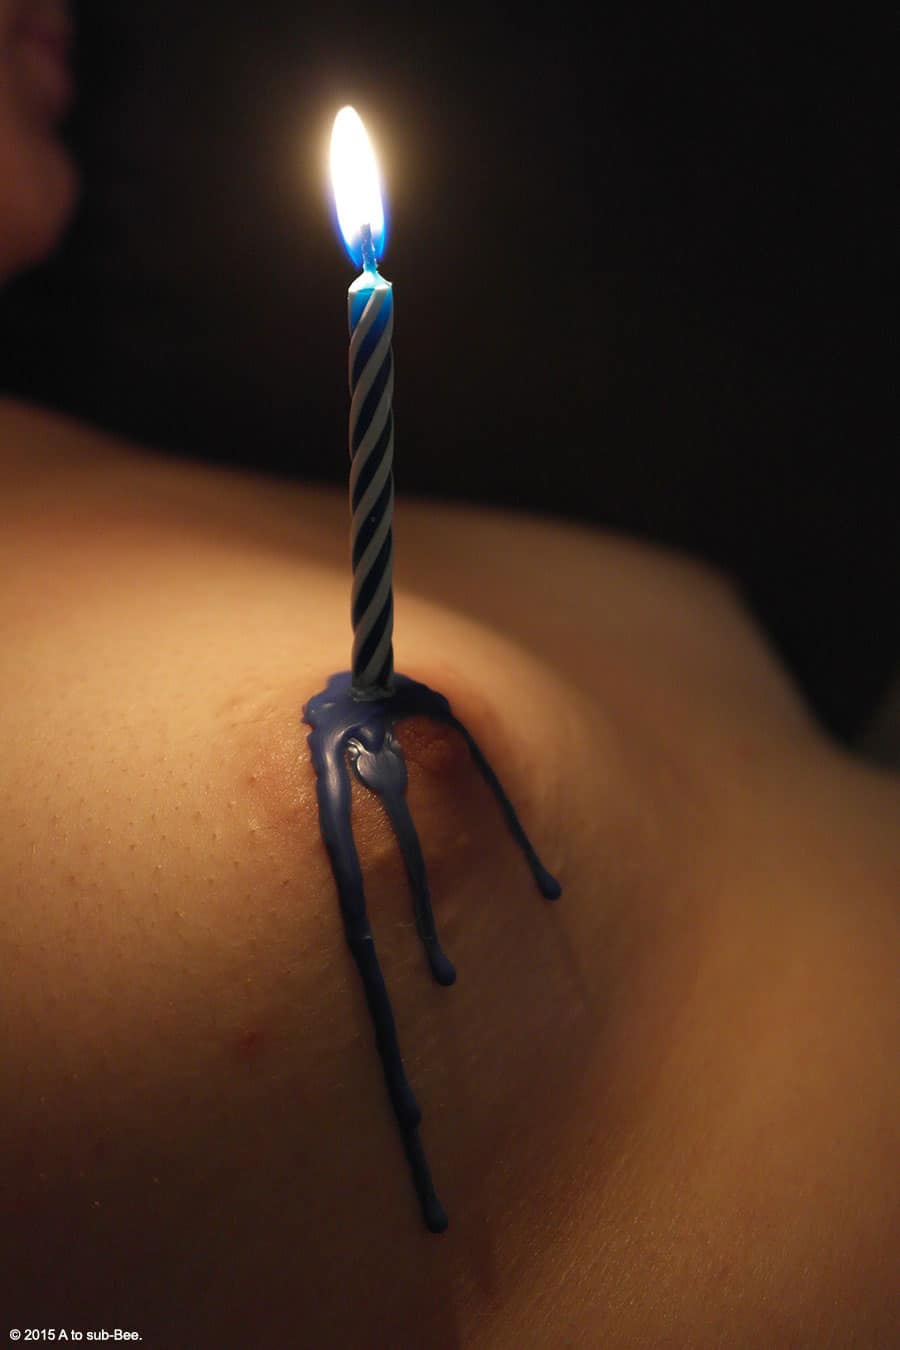 Sending congratulations for a 200th anniversary by showing a lit birthday candle on my Bee's breast.